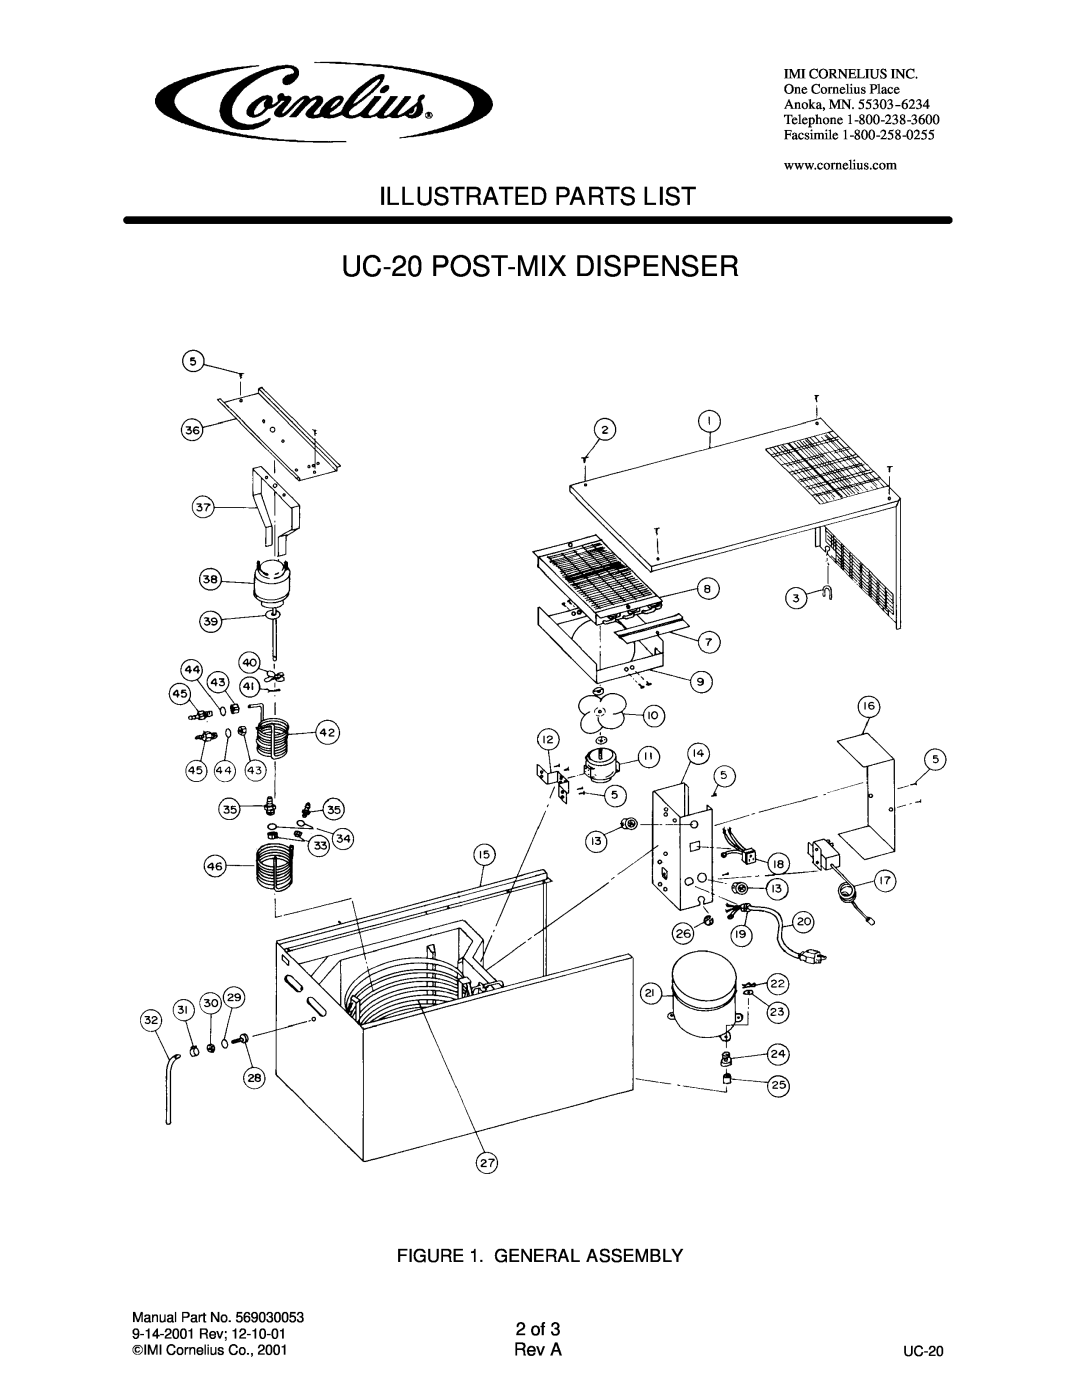 Cornelius manual UC-20 POST-MIXDISPENSER, General Assembly, 2 of, Illustrated Parts List, Rev A 